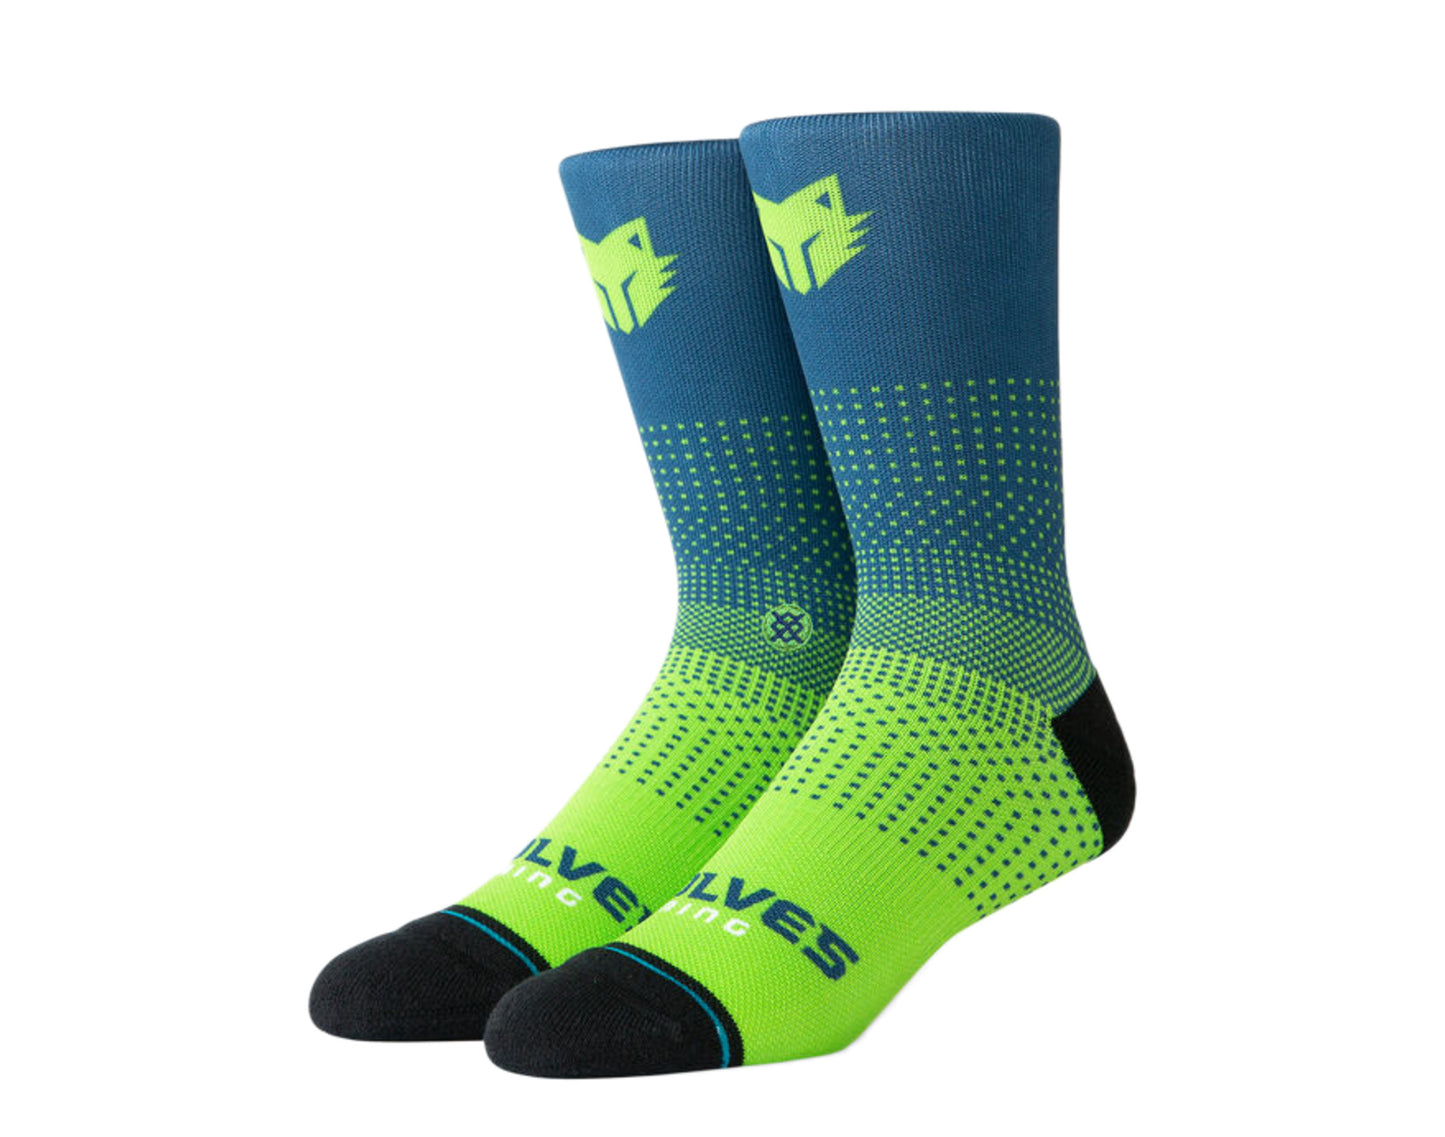 Stance Casual NBA Twolves Gaming 2K Navy/Lime Crew Socks M558A19TWG-NVY